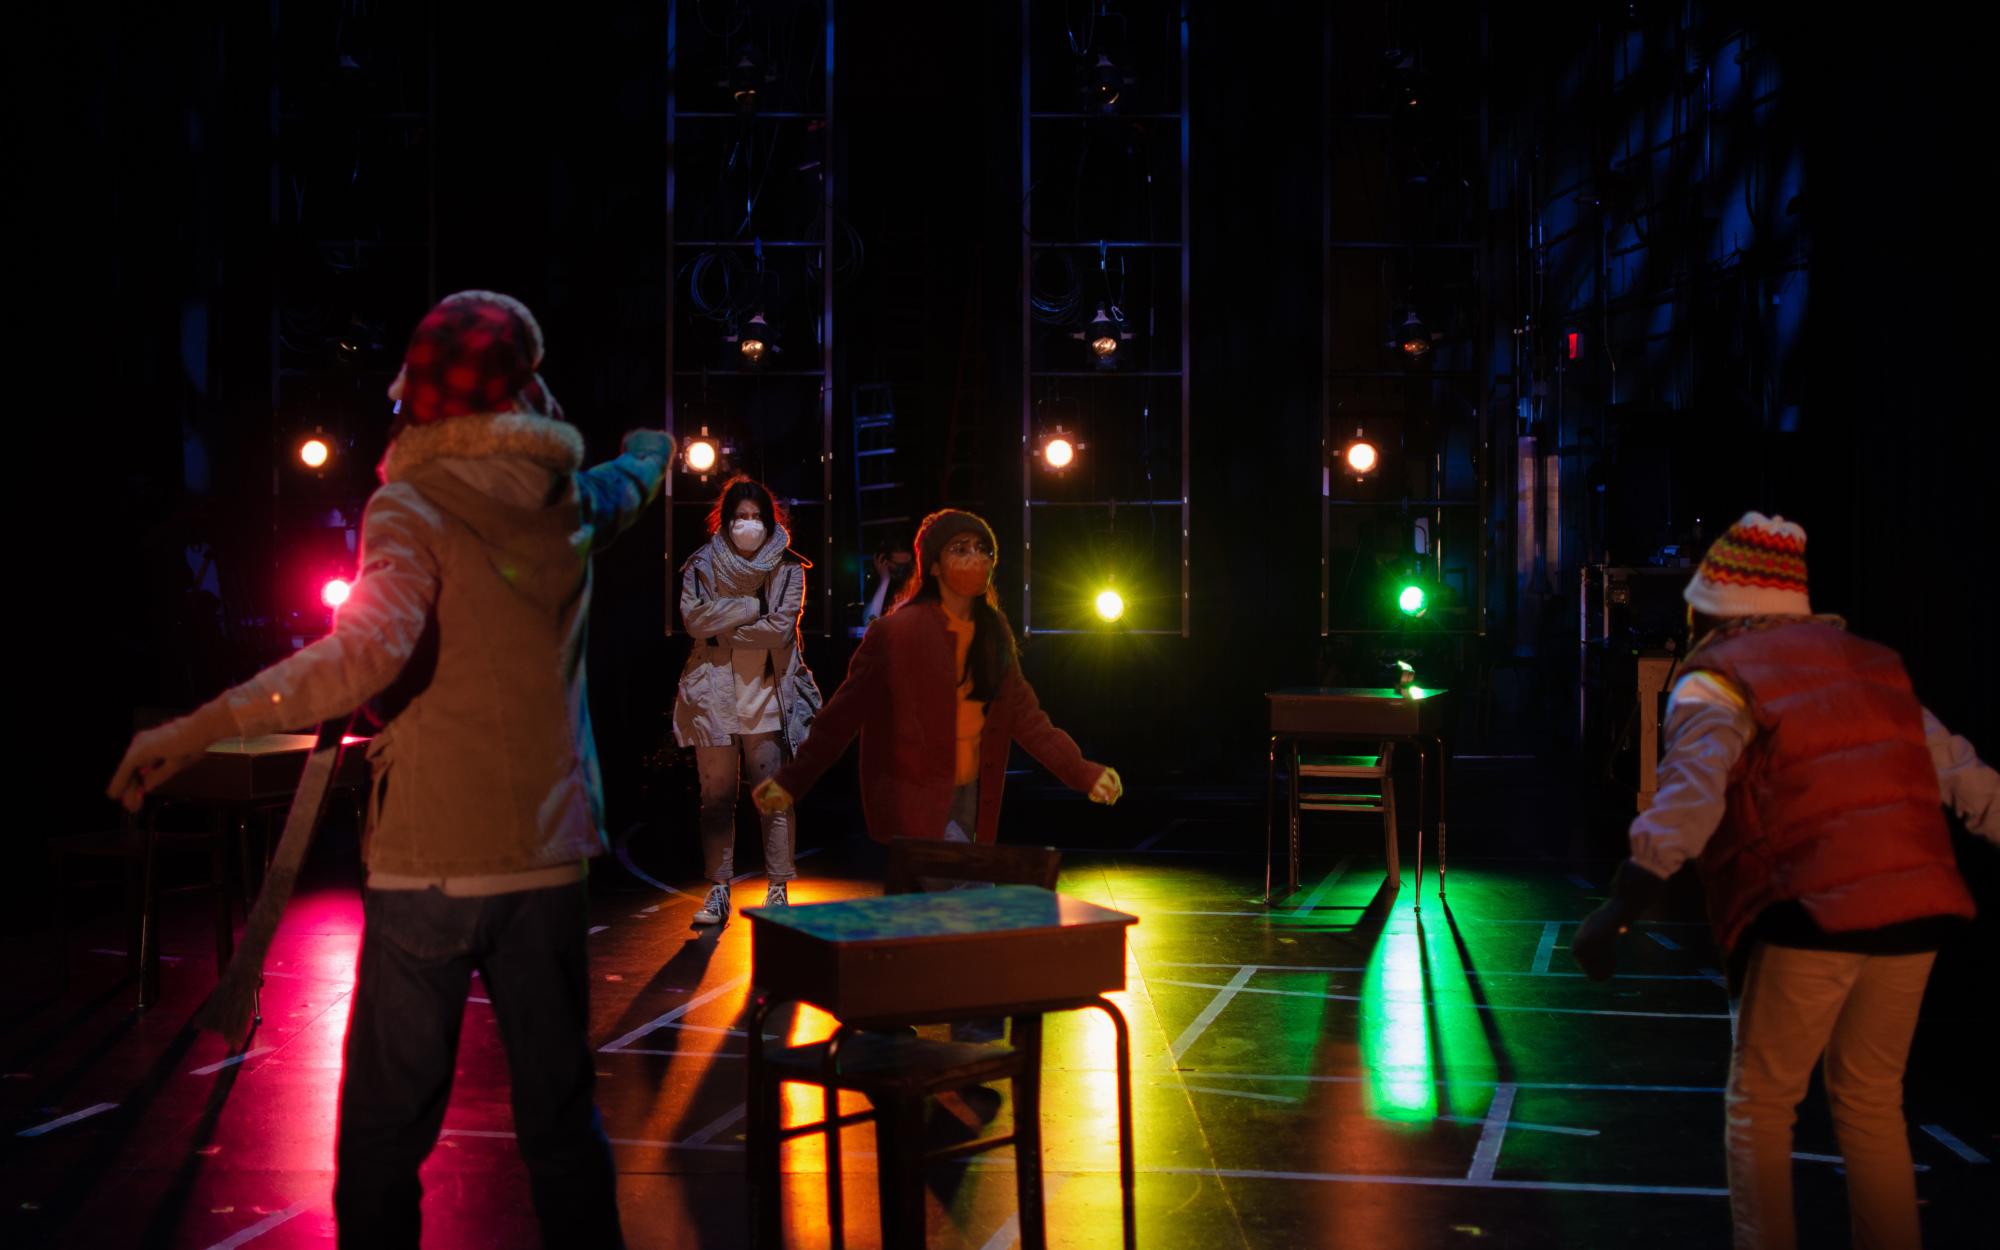 four actors portraying children playing in the winter, on a colorfully lit stage